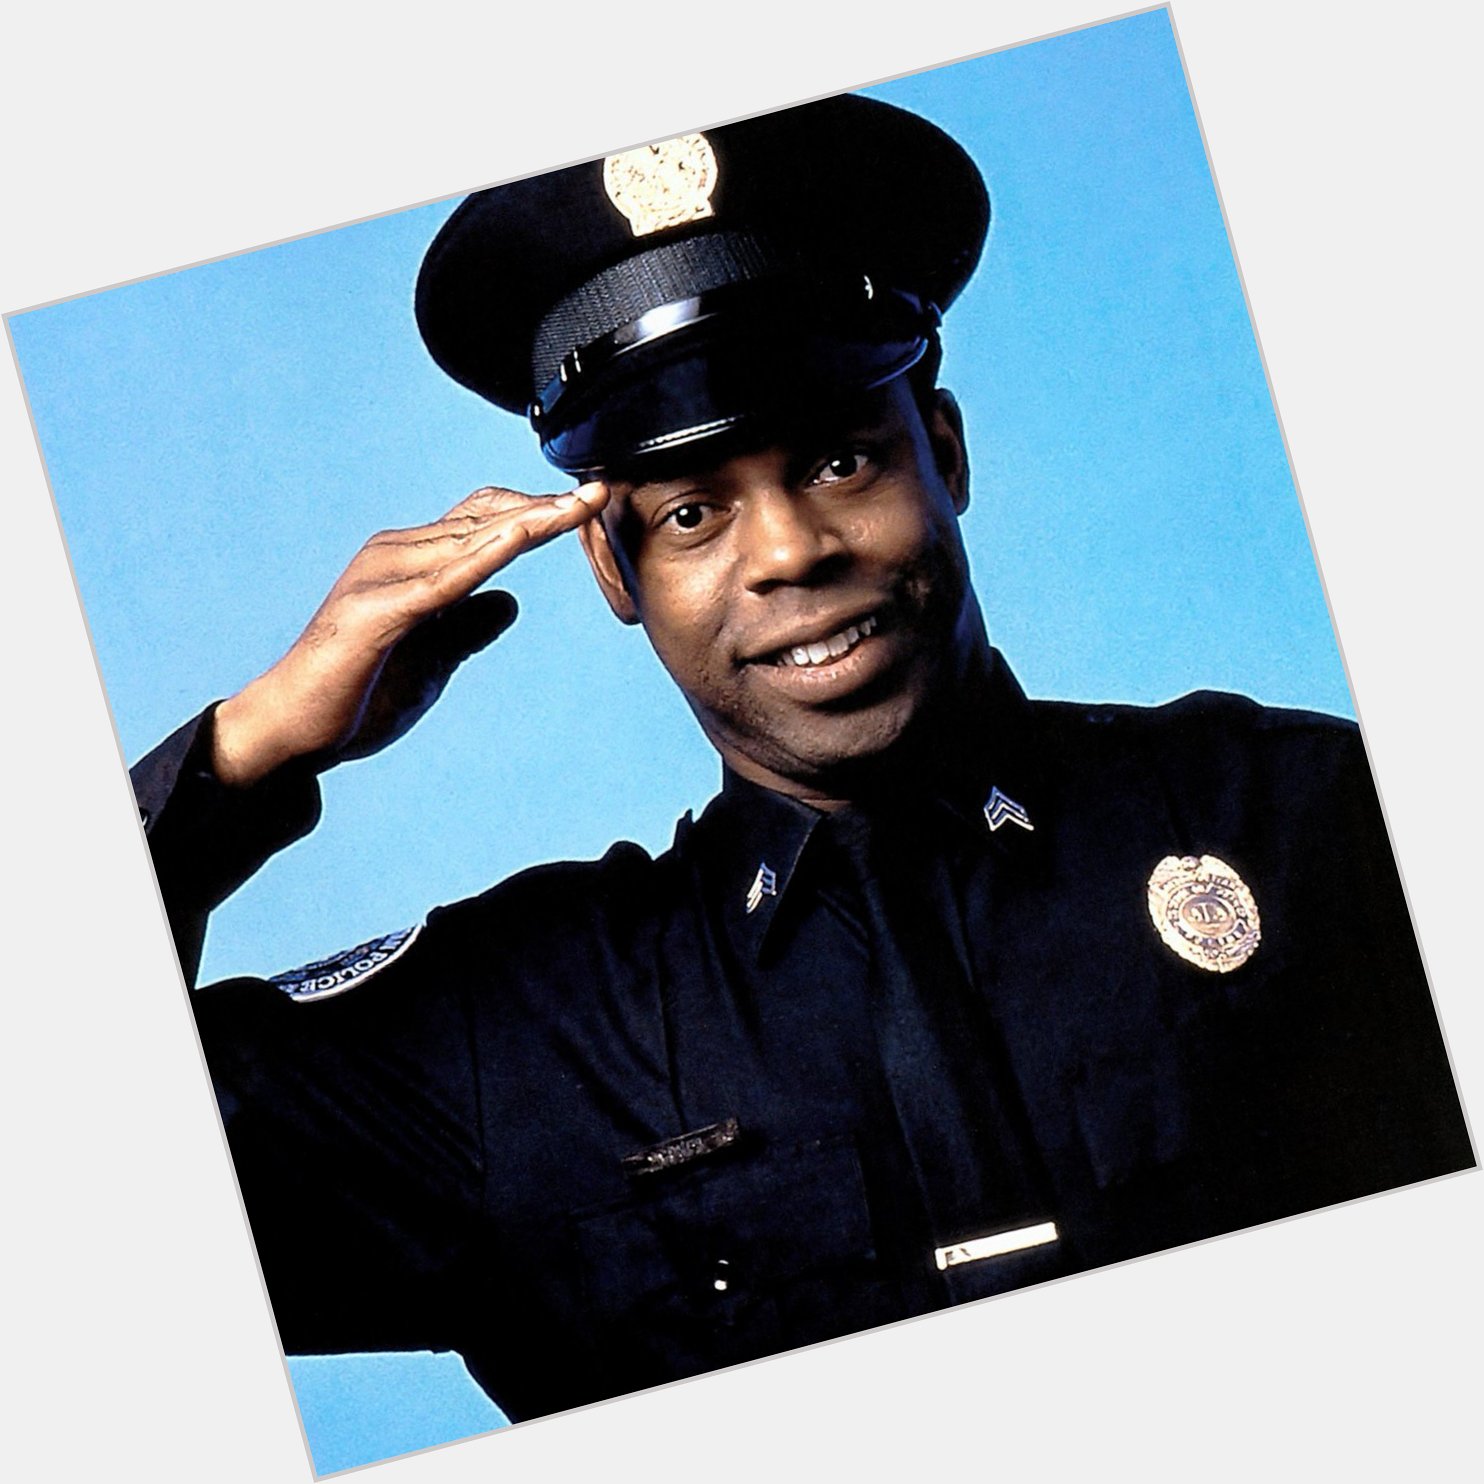 Wishing a happy birthday to Police Academy star and Man of 10,000 Sound Effects, Michael Winslow! 